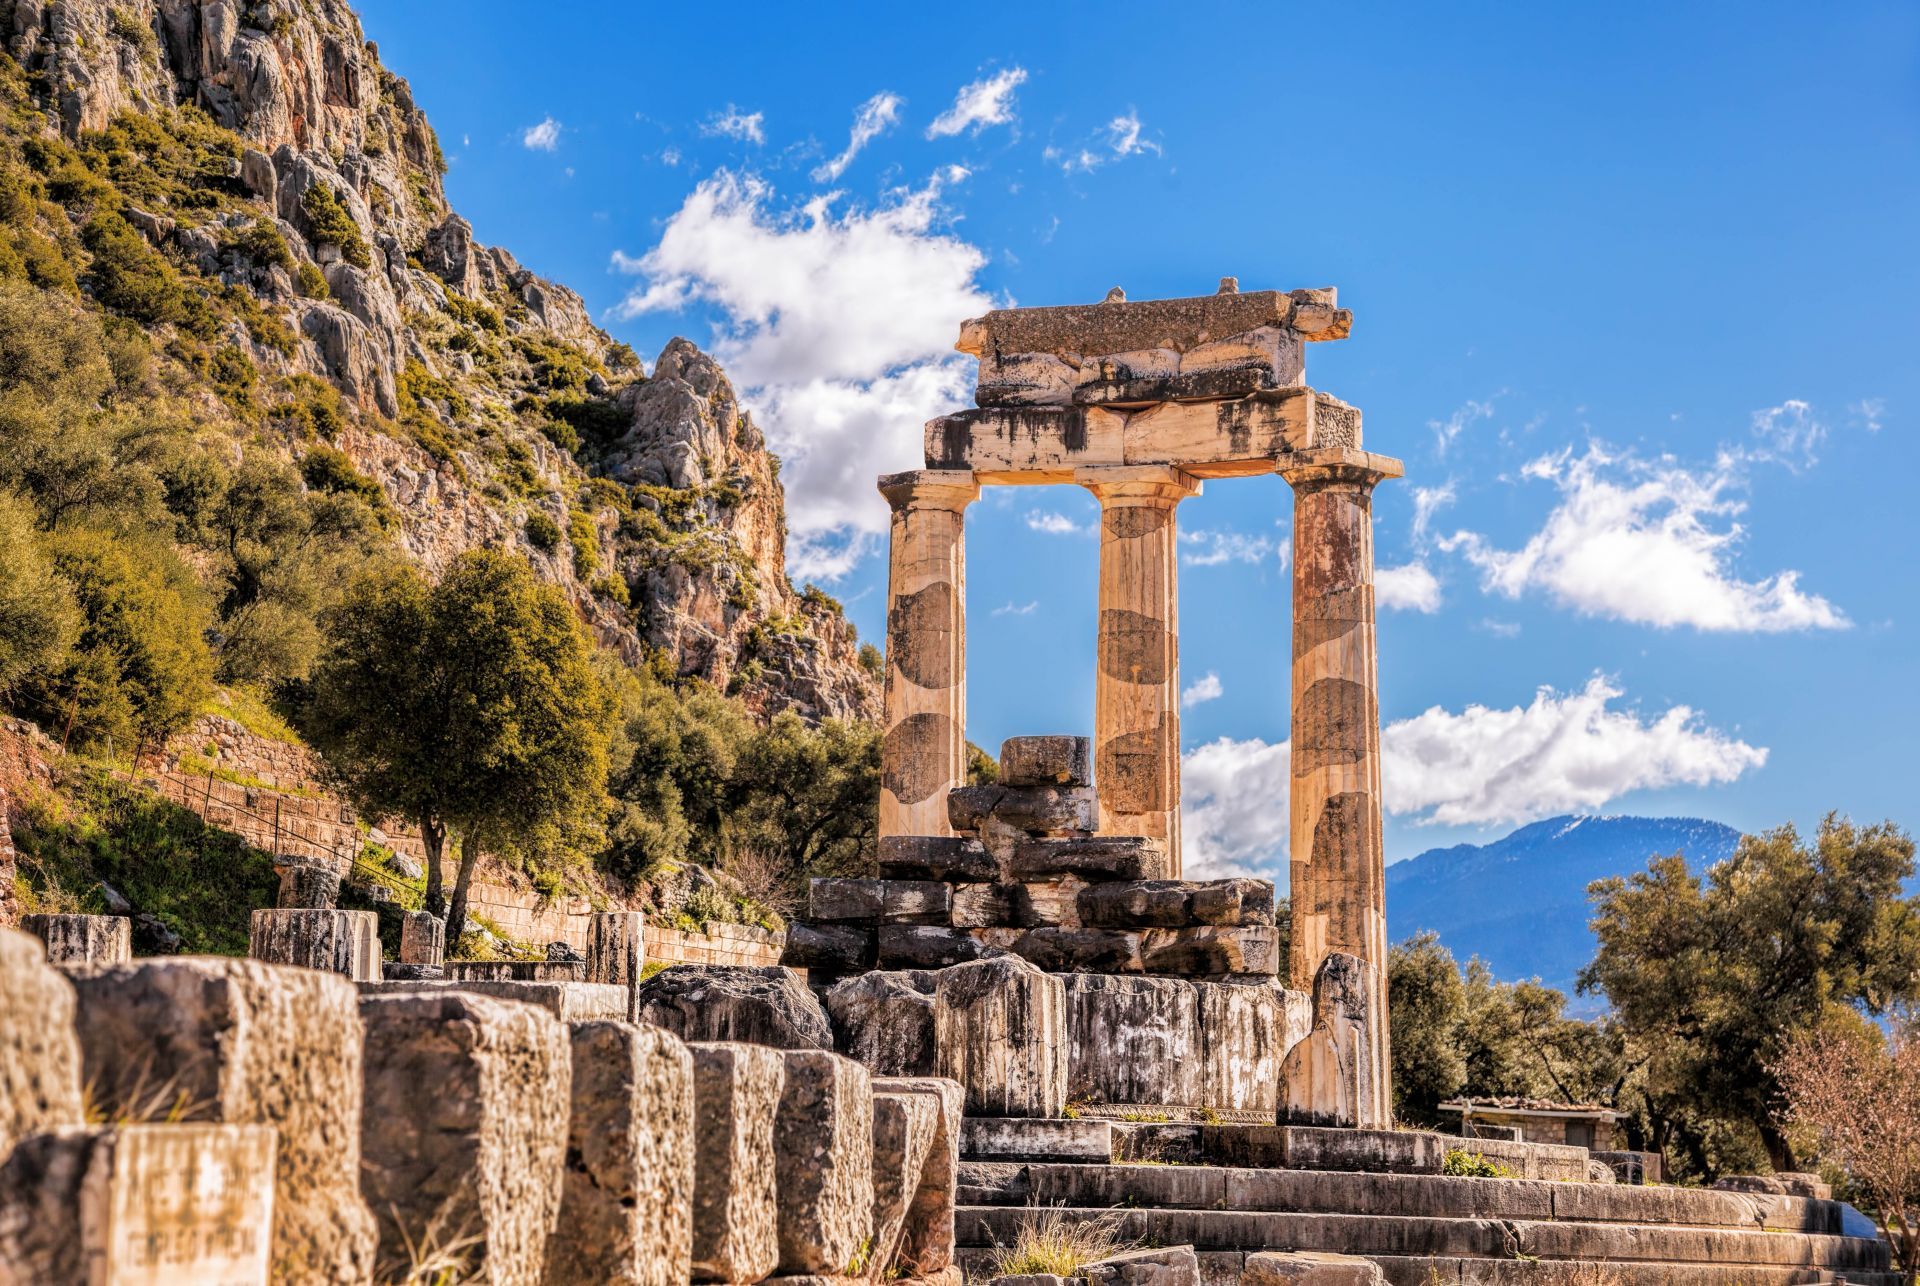 Visit Delphi Ancient site, a great thing to do while in Greece